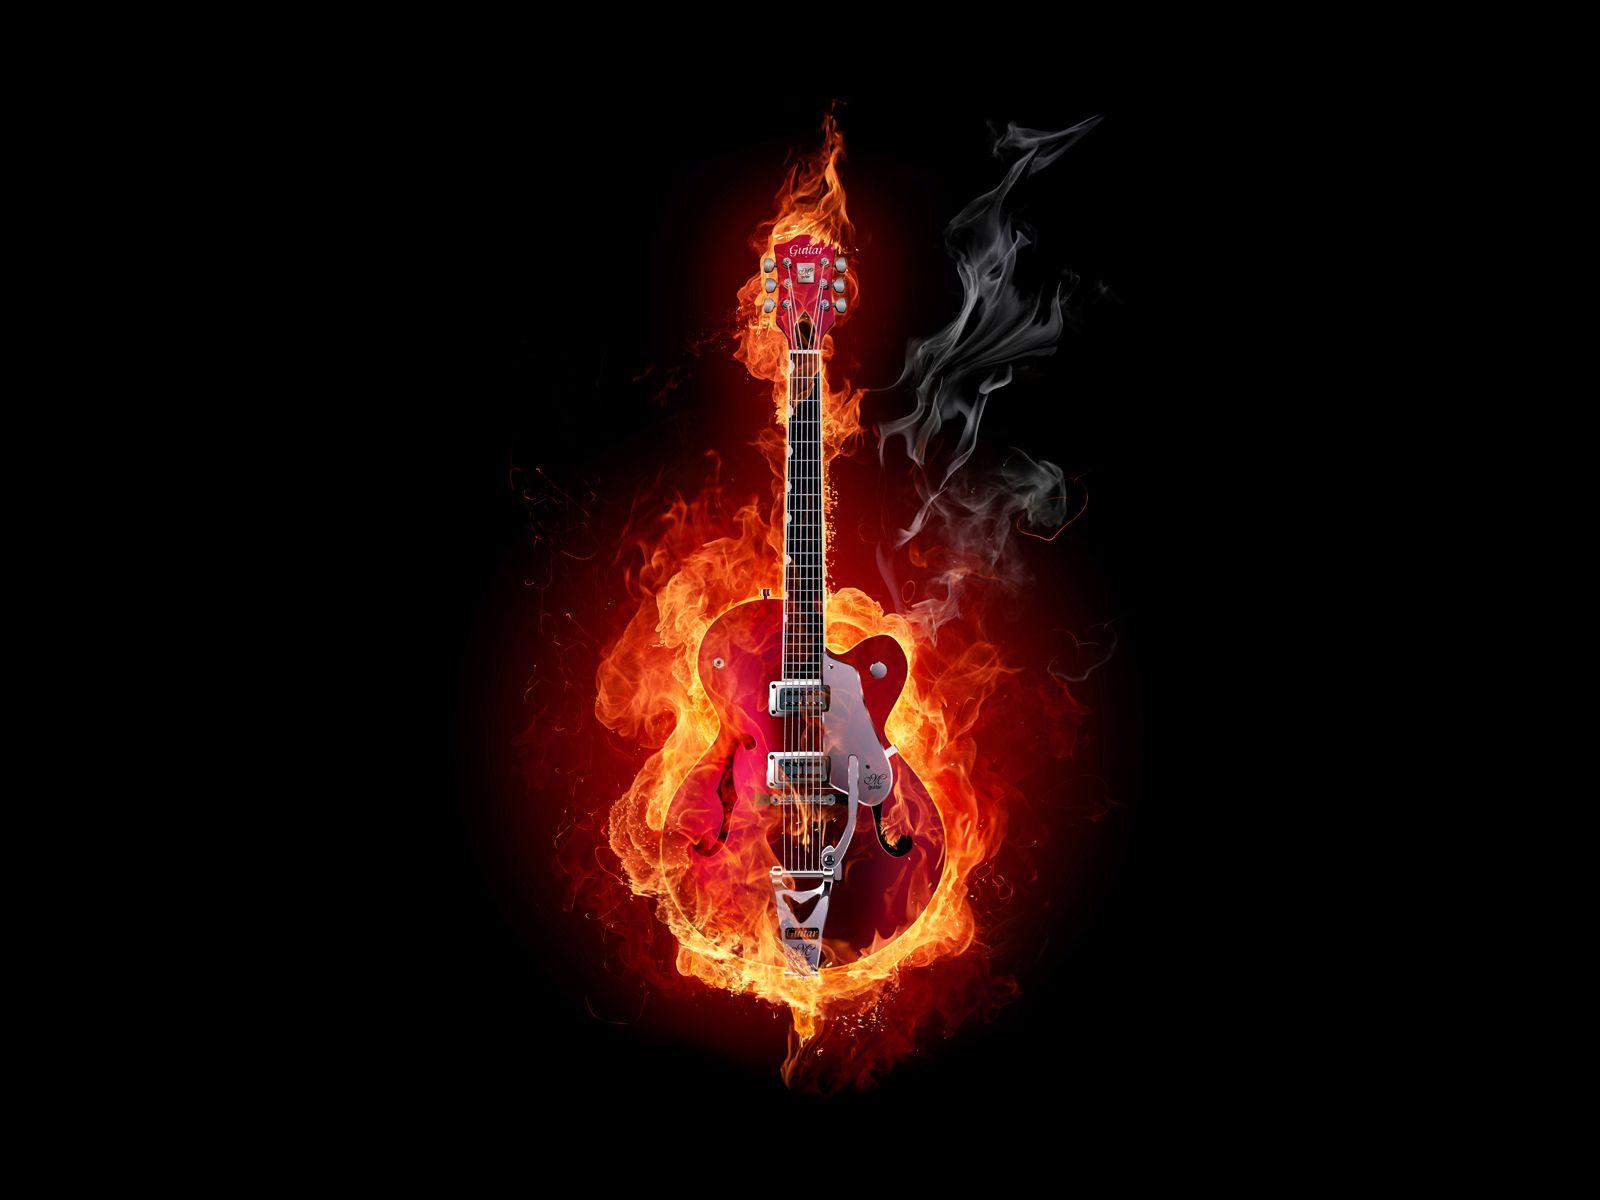 Burning guitar Wallpaper and Background Imagex1200